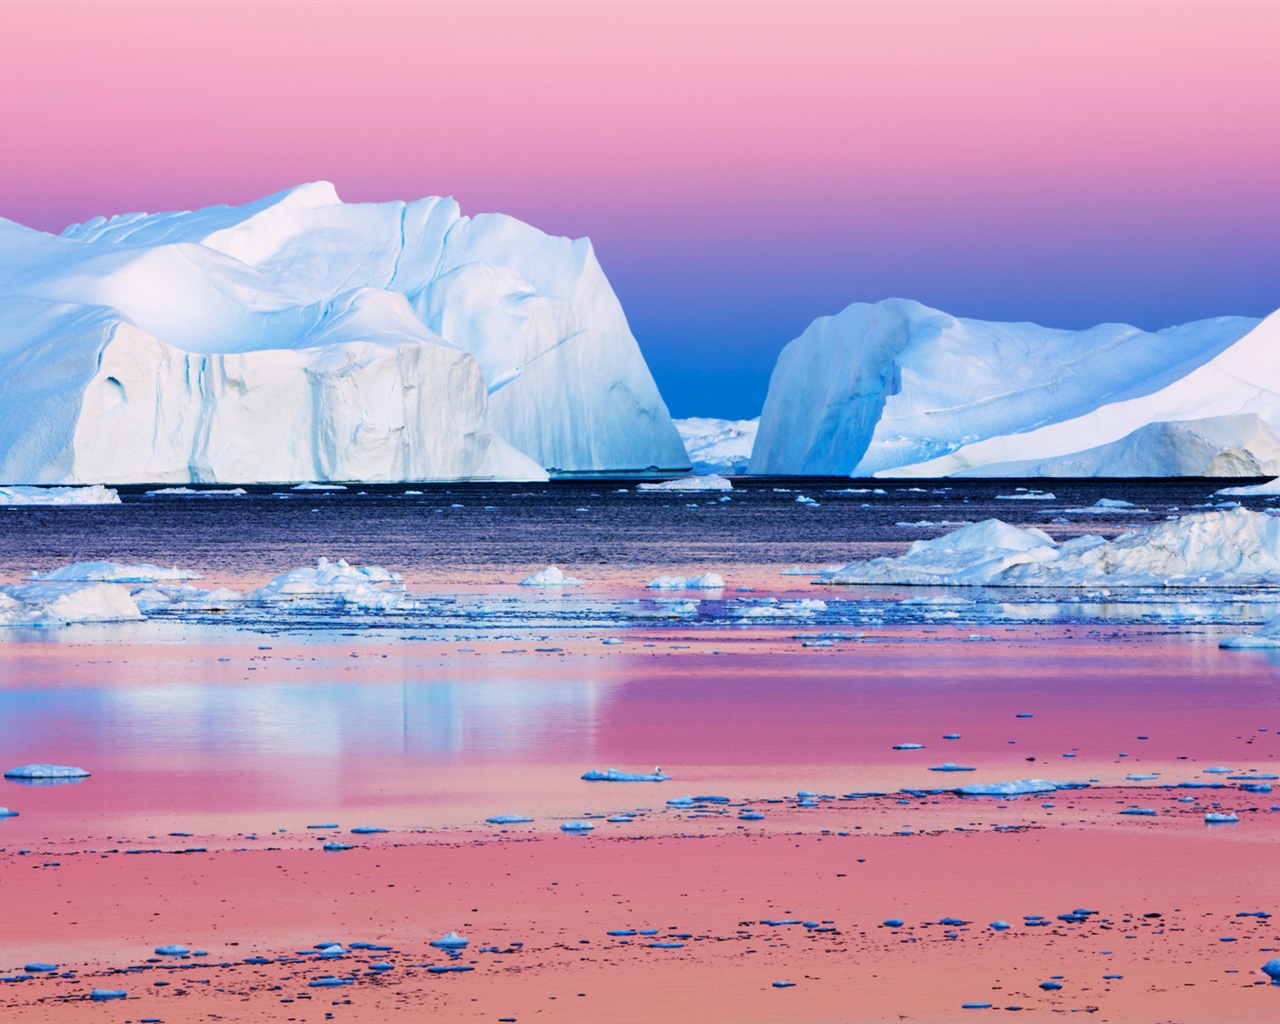 Windows 8 Wallpapers: Arctic, the nature ecological landscape, arctic animals #7 - 1280x1024